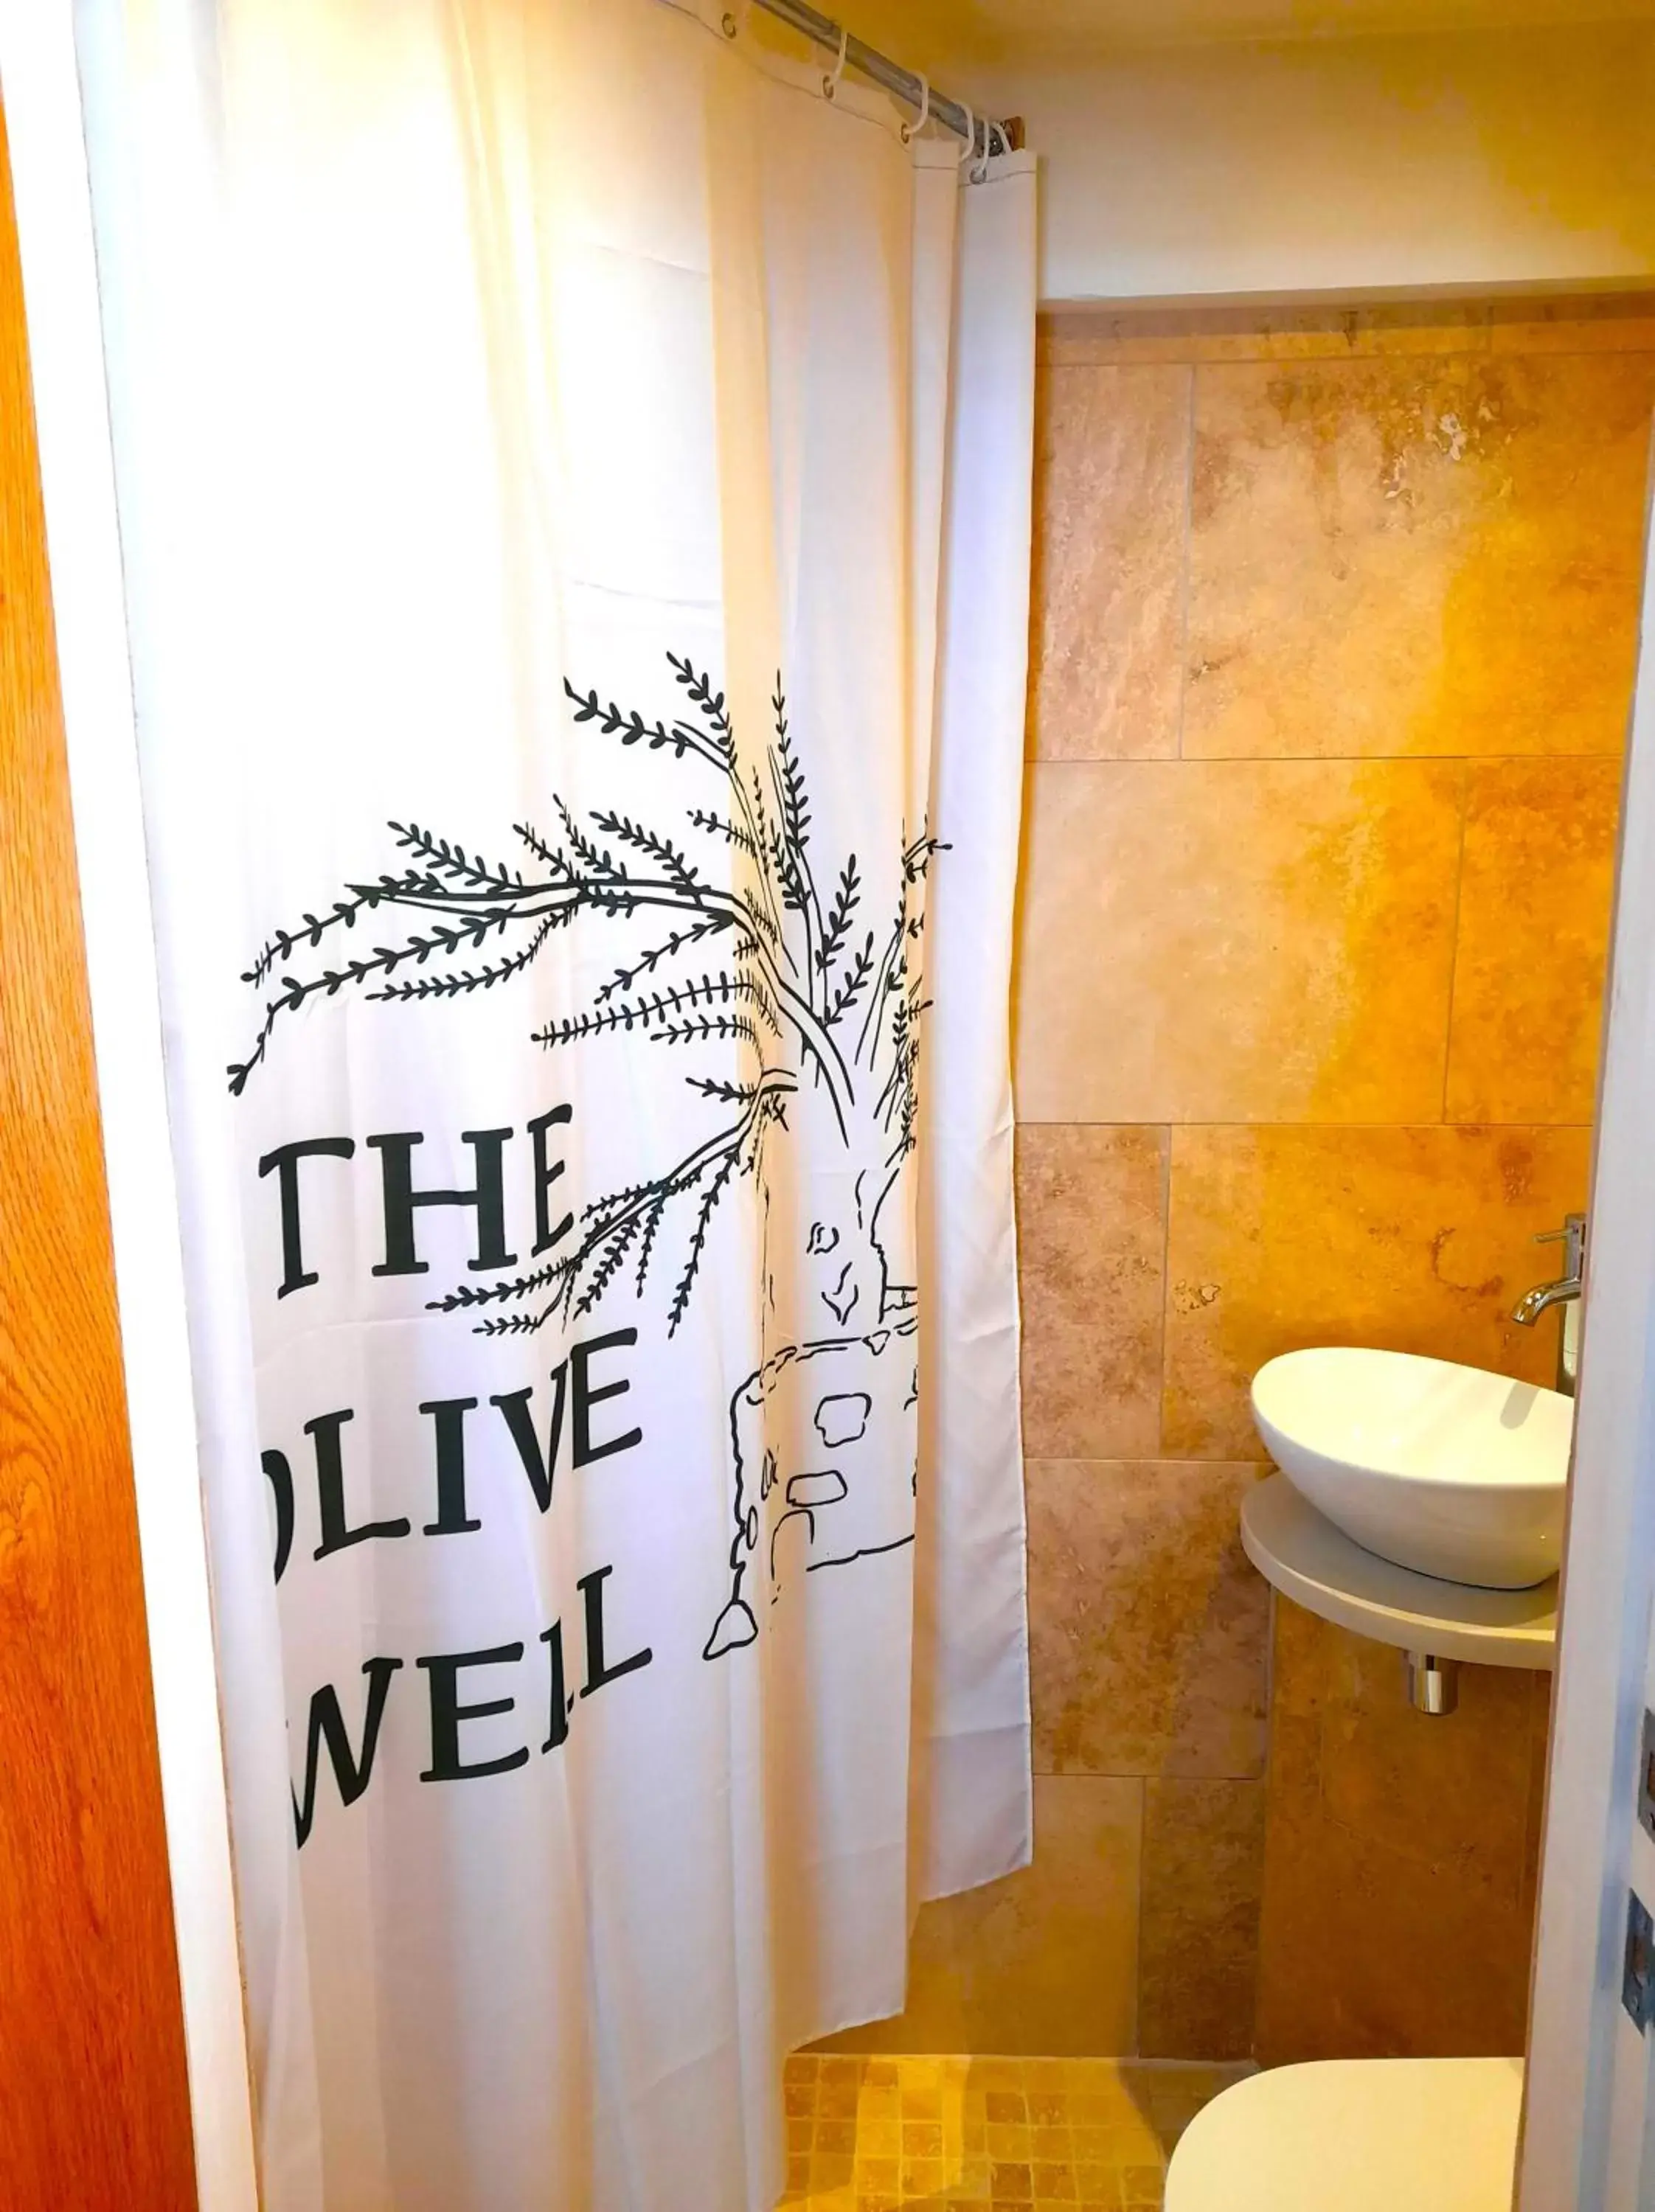 Bathroom in The Olive Well